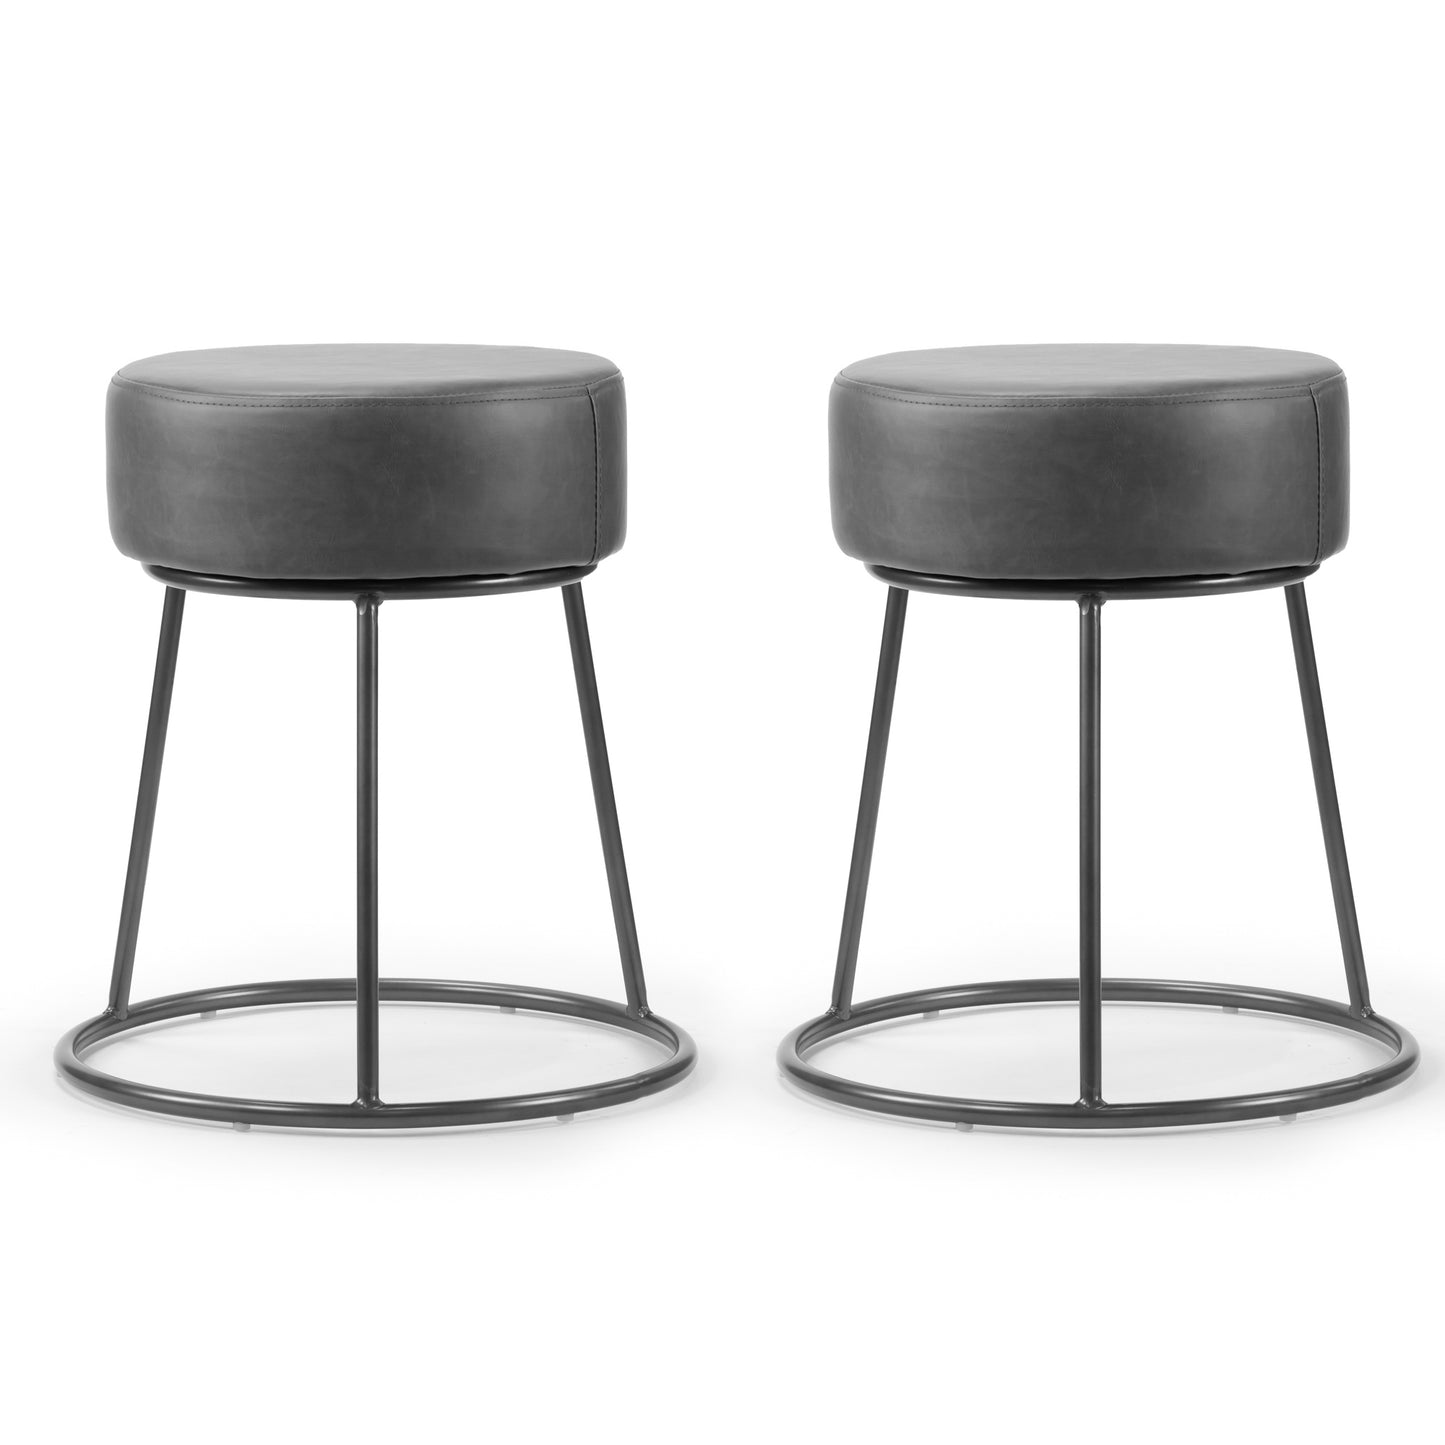 Set of 2 Amie Grey Backless Dining Chair with Gunmetal Grey Frame